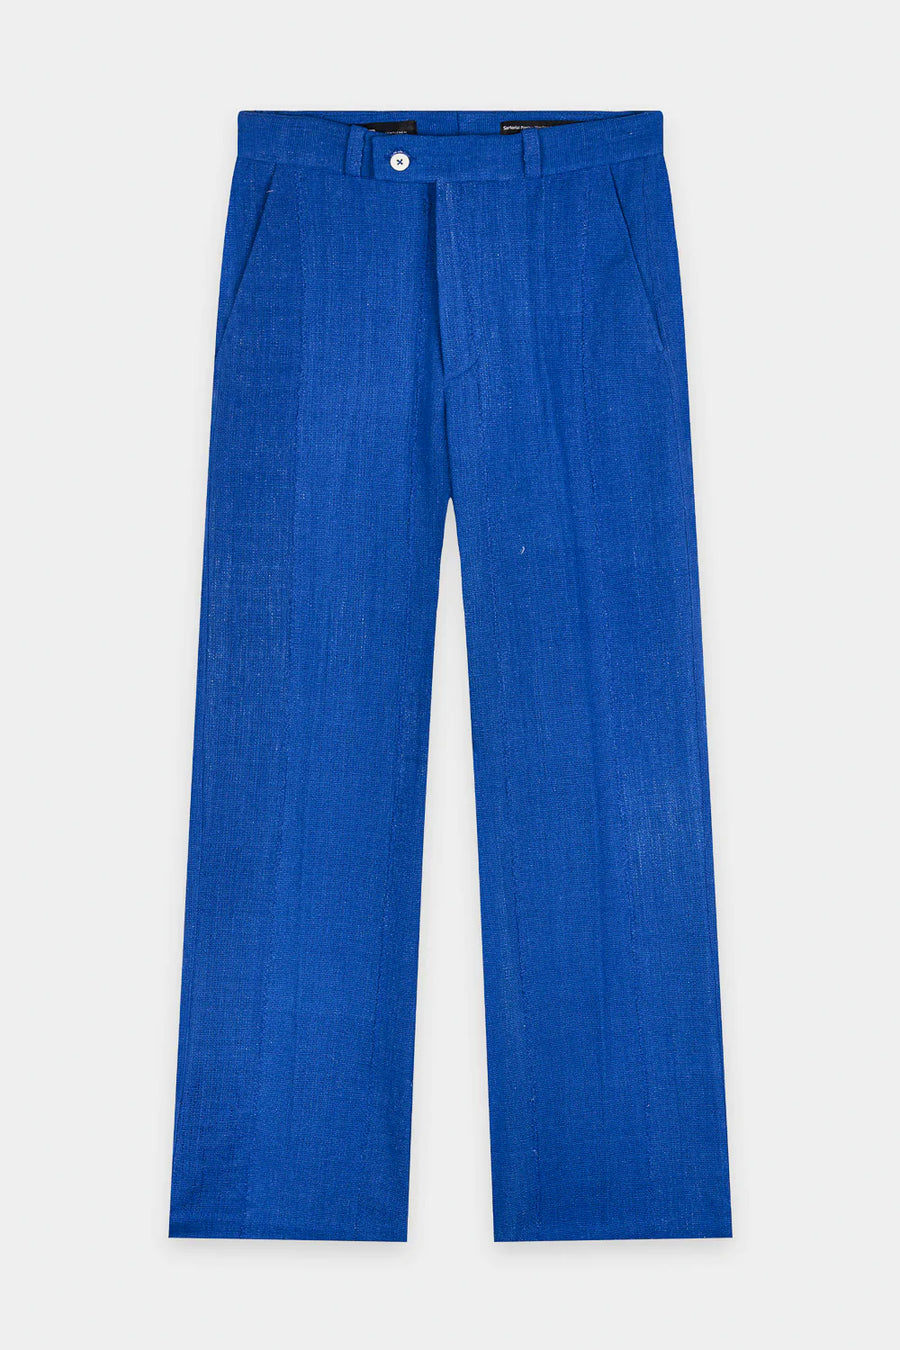 Fela II Tailor Fitted Straight Cut Pant - Blue